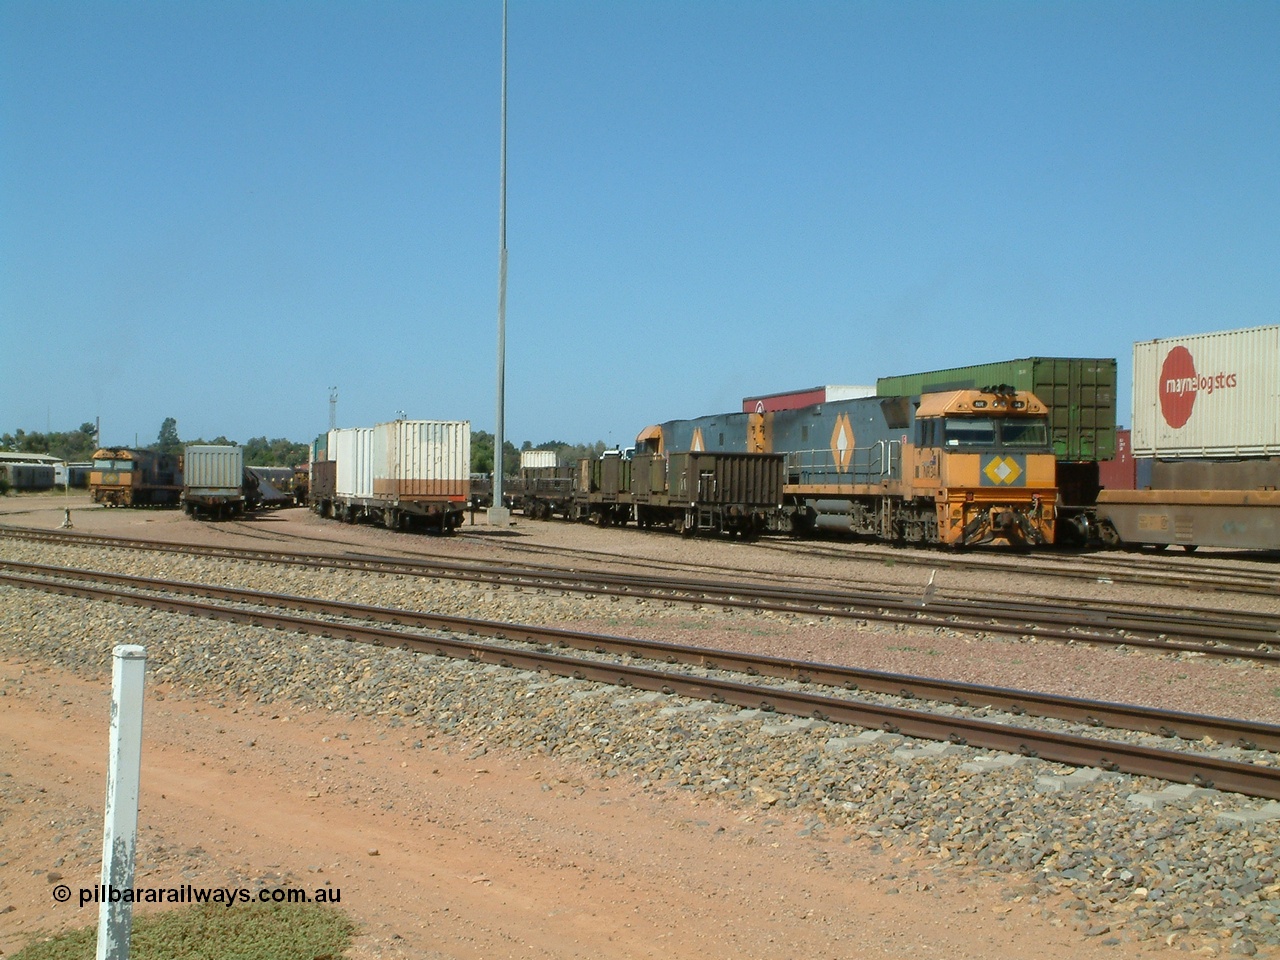 030404 103950
Port Augusta Spencer Junction yard, view looking south with various waggon consists and NR class locomotives present. 4th April 2003.
